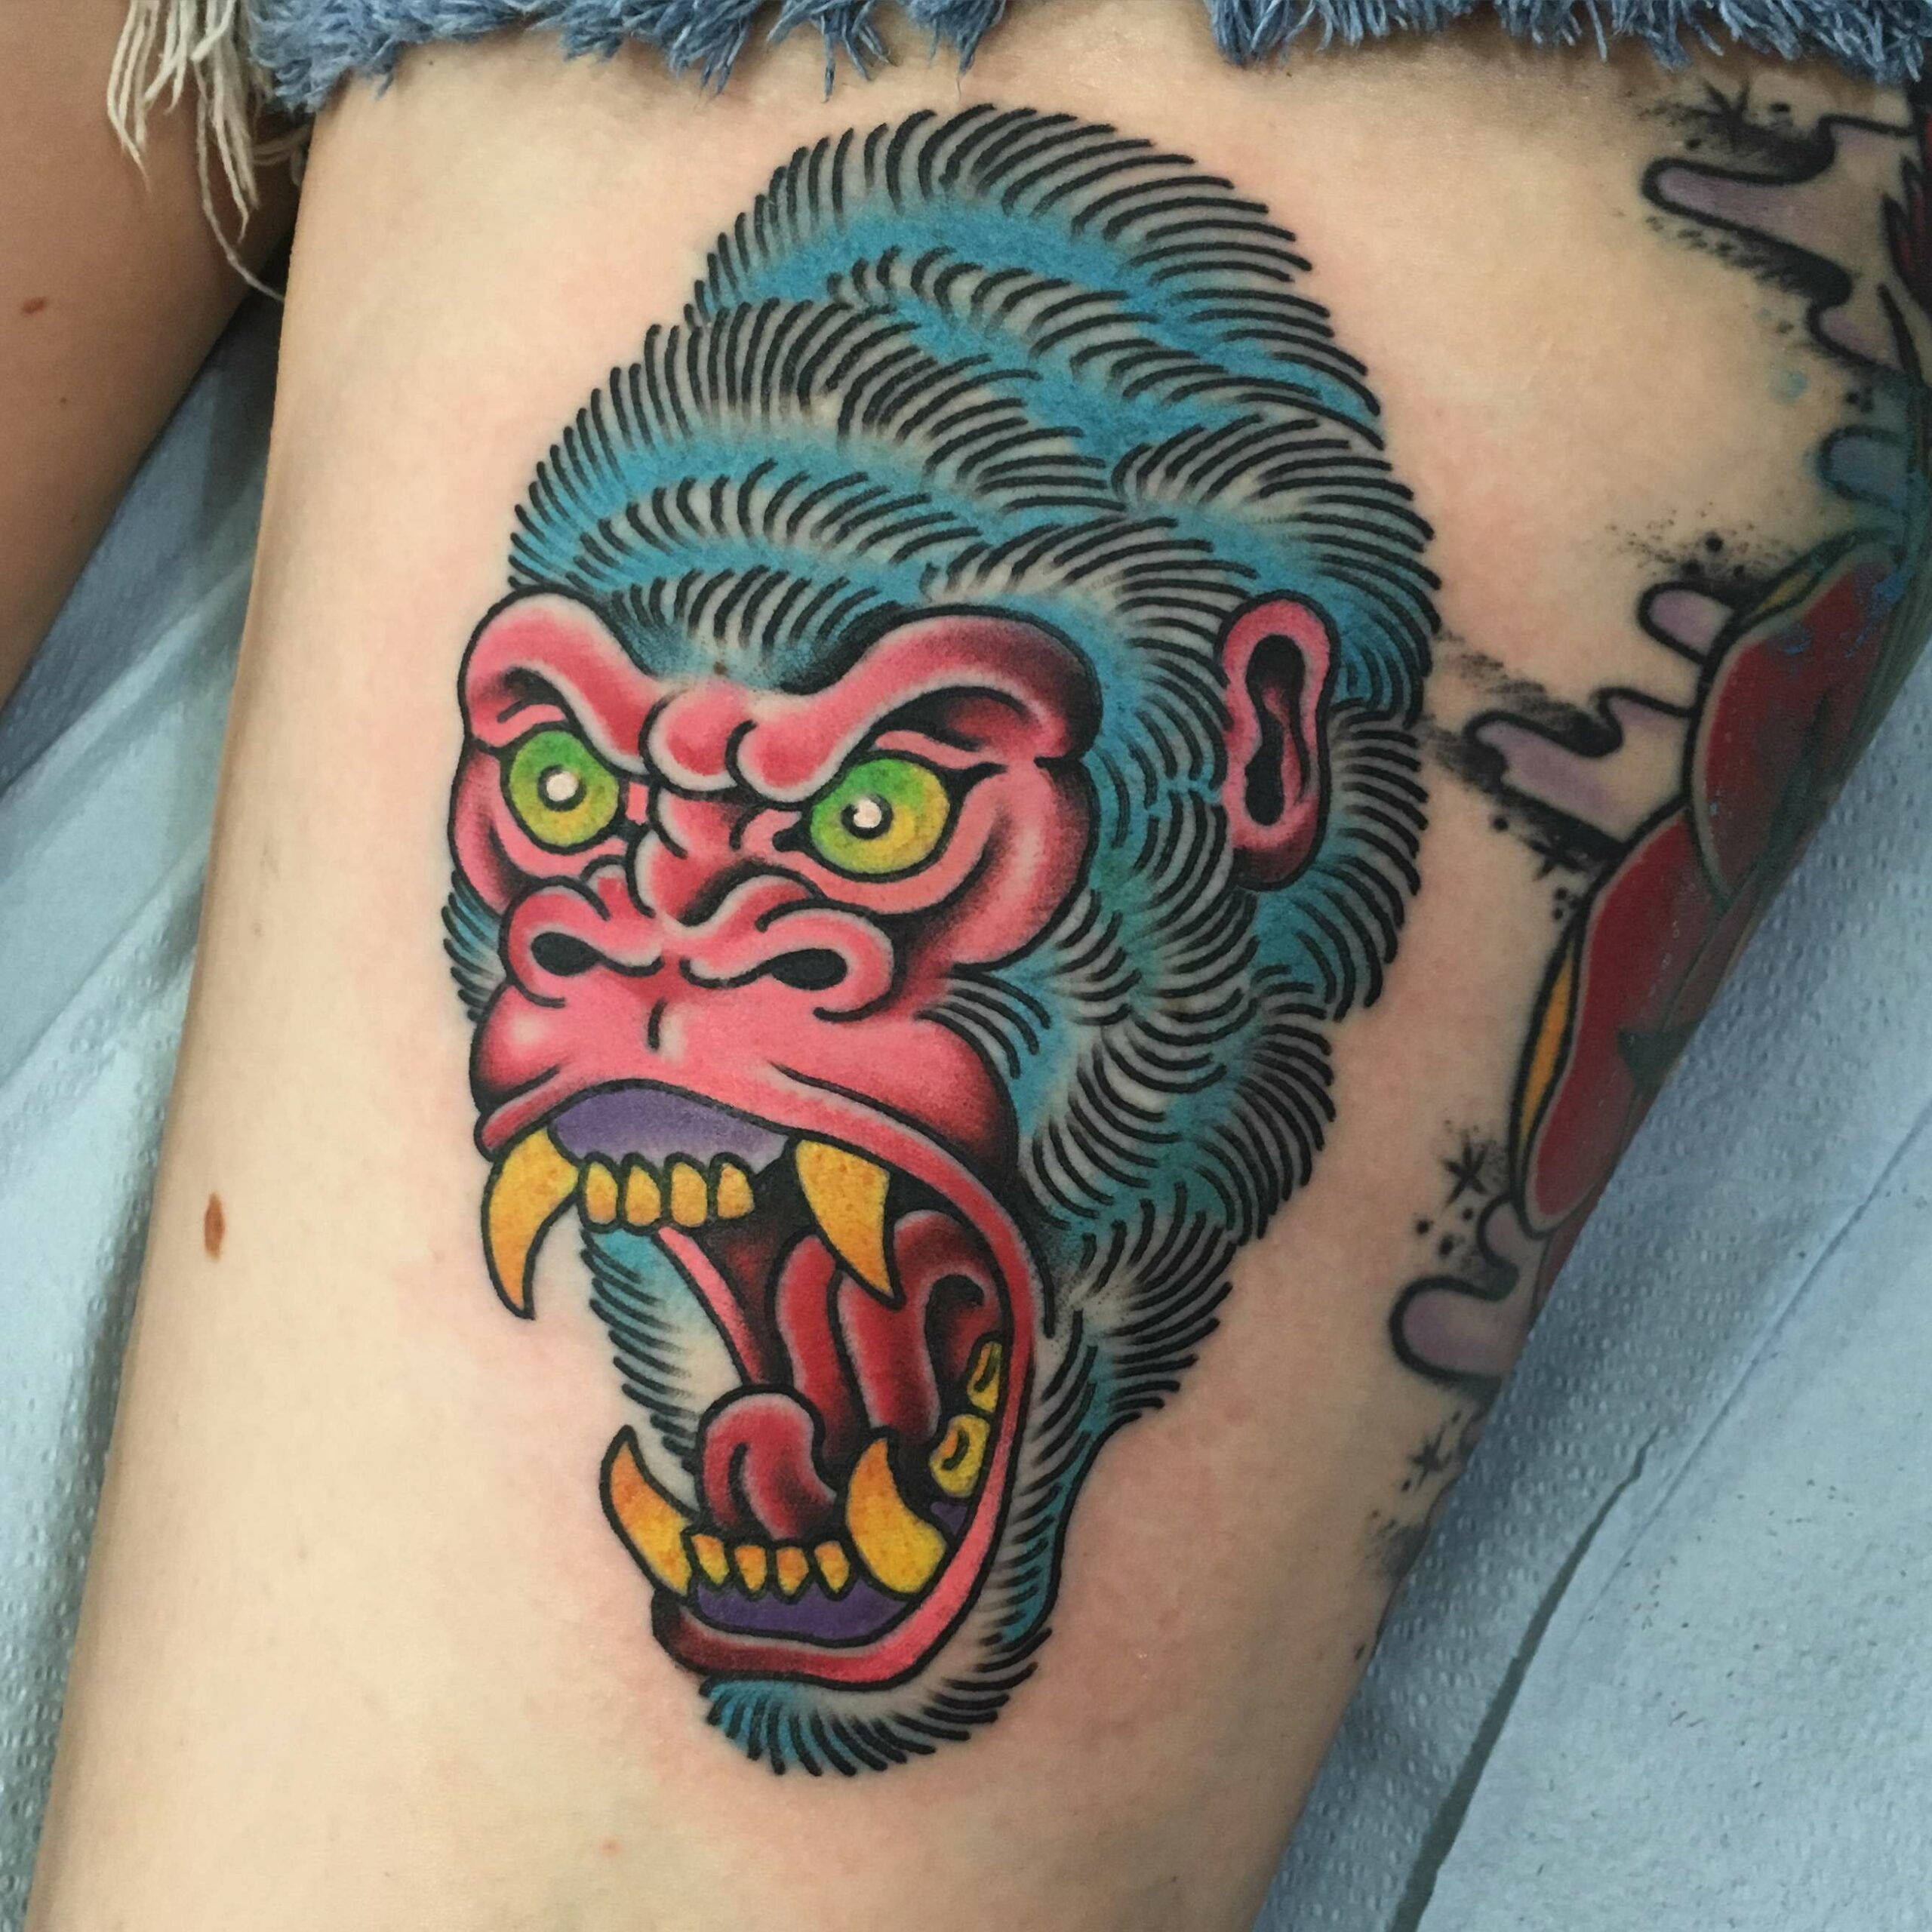 Gorilla Head by Eli Quinters at Smith Street Tattoo Parlour in Brooklyn  NY  rtraditionaltattoos